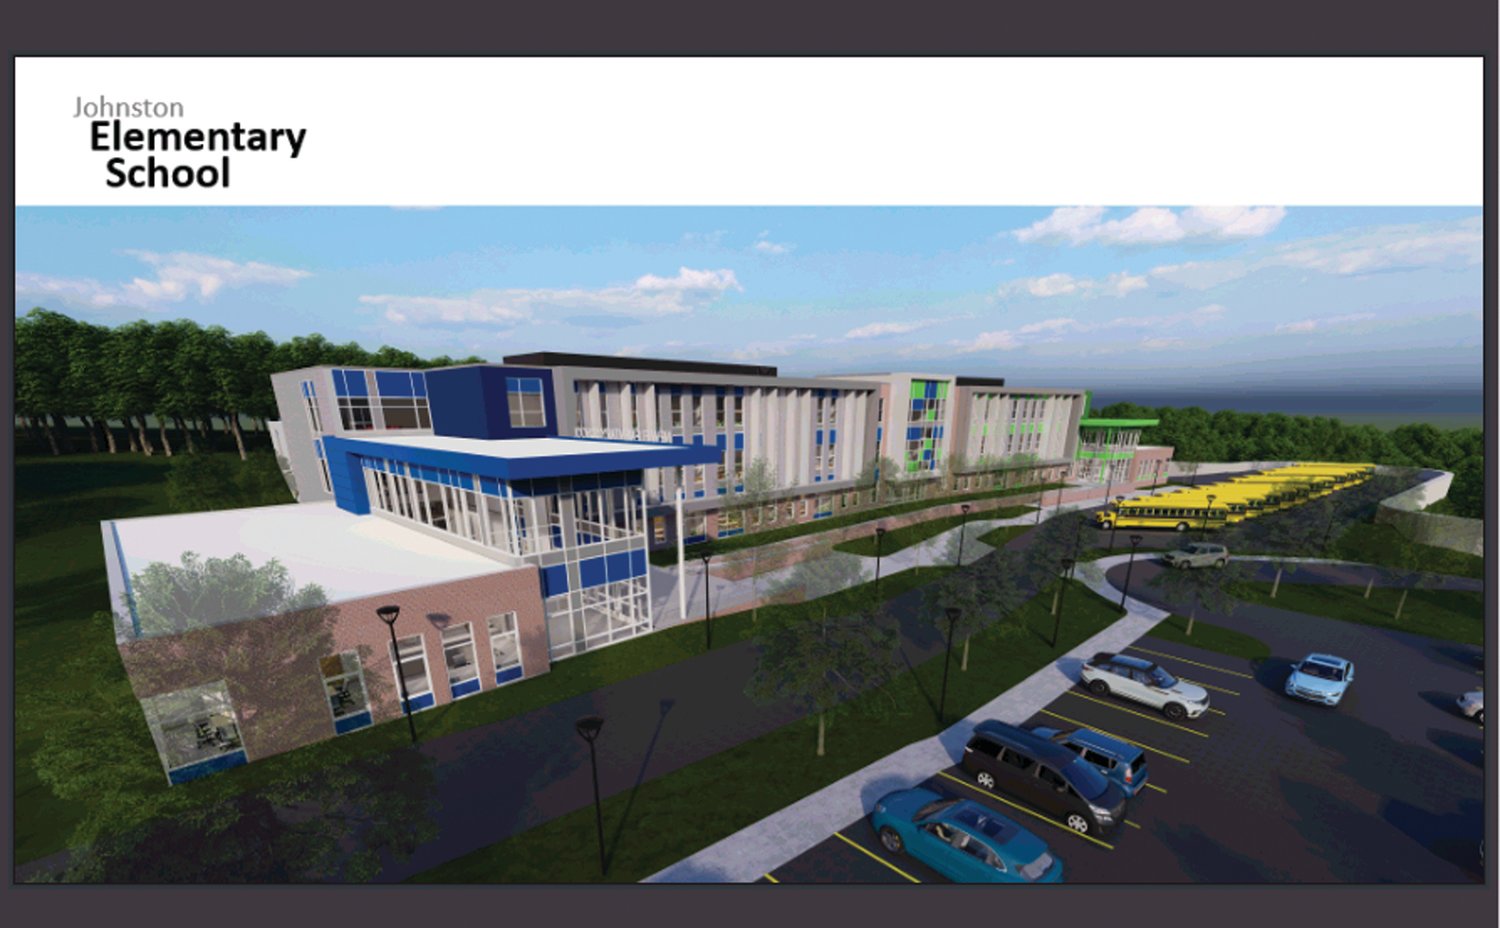 ELEMENTARY CENTER: The large consolidated, new elementary school will be built to educate 1,100 students in grades 1-4. The proposal calls for building the new Johnston Elementary School on town property just north of the Johnston High School.